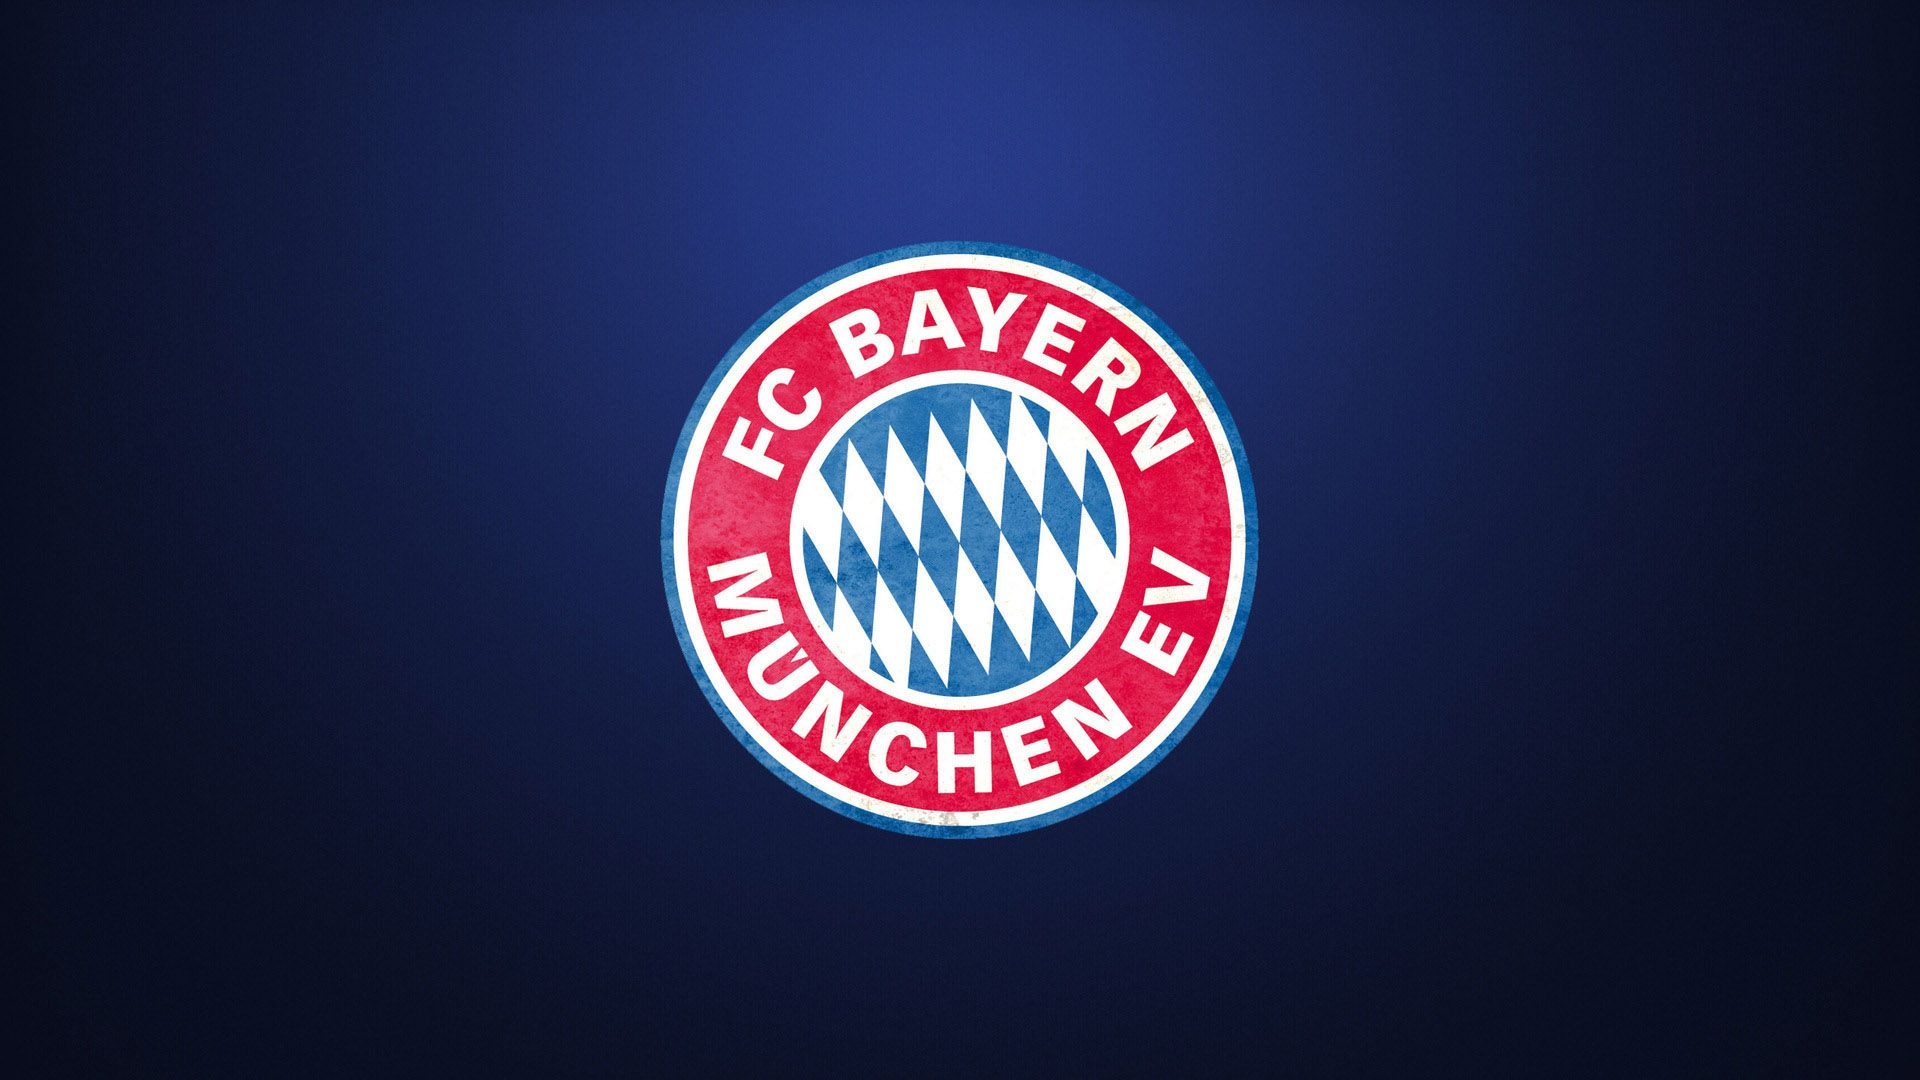 Bayern Munchen FC: The winner of all three of UEFA's main club competitions. 1920x1080 Full HD Wallpaper.